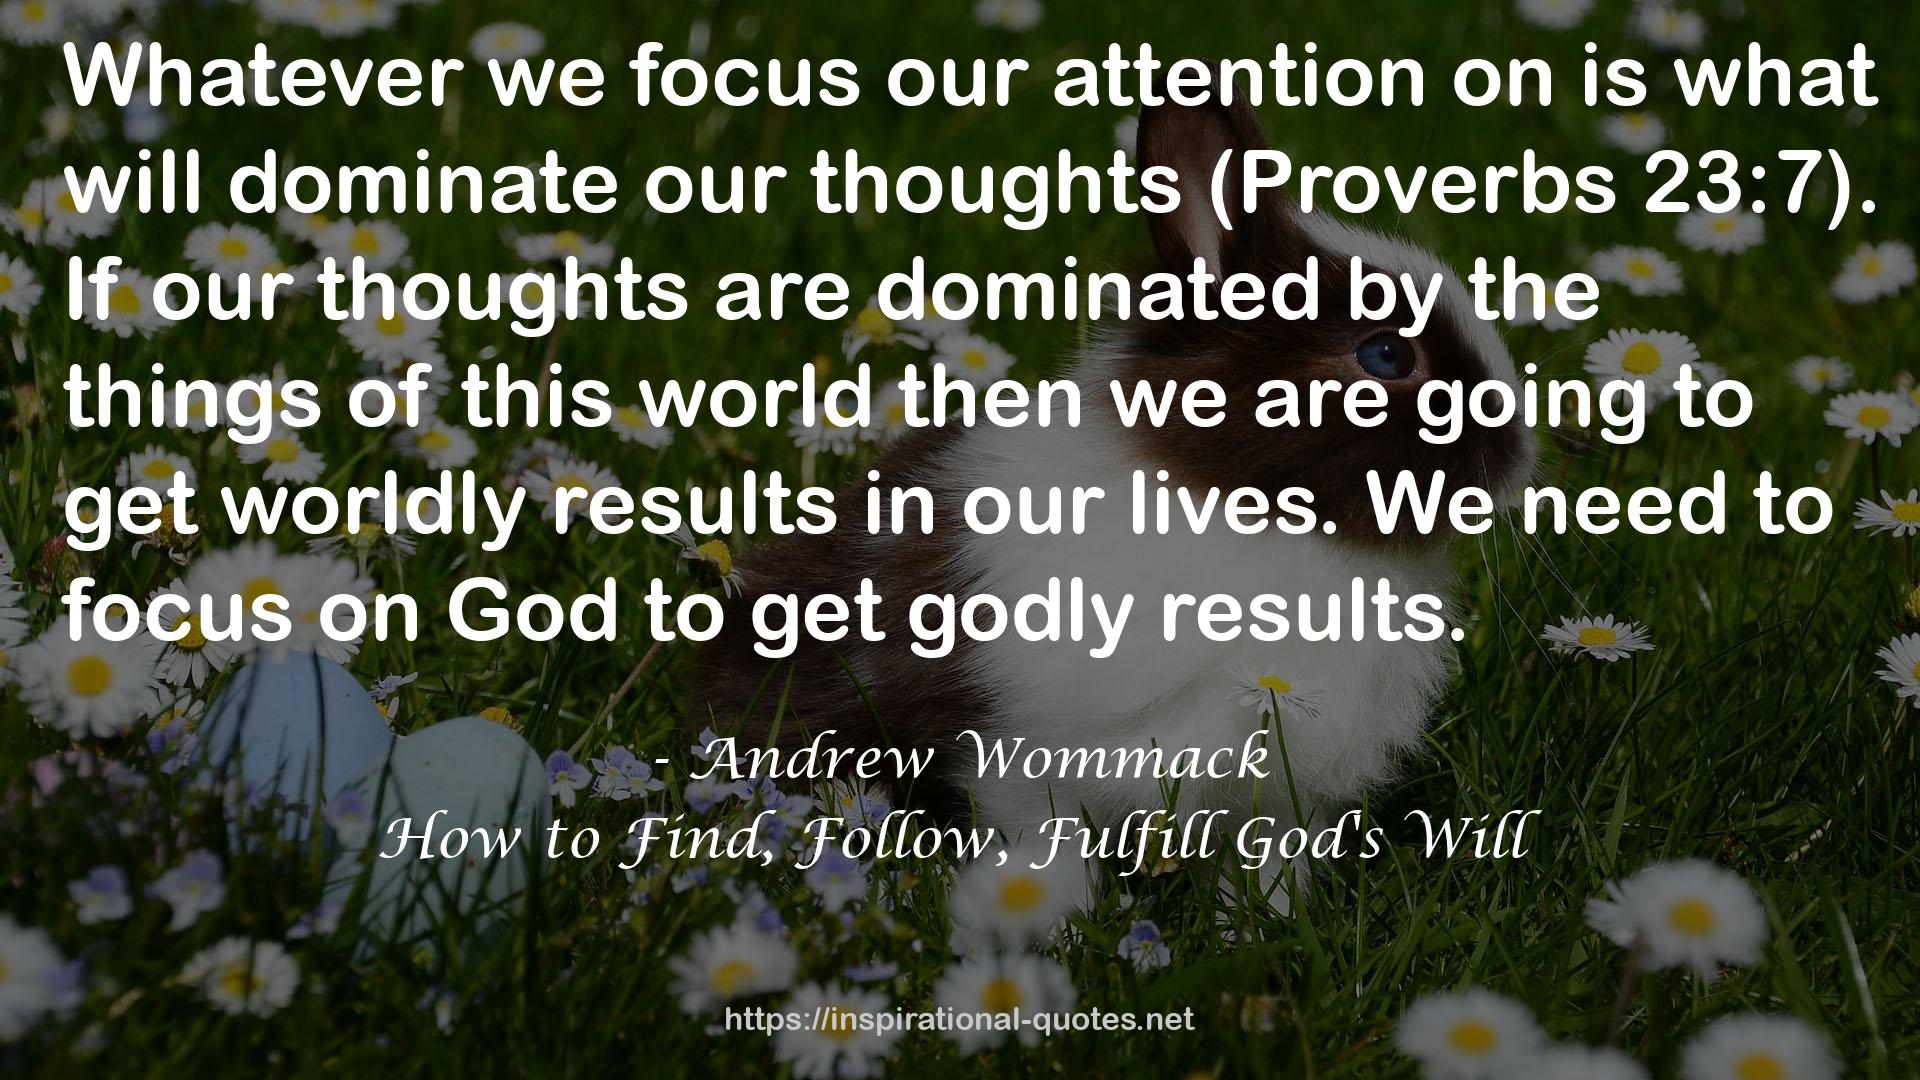 How to Find, Follow, Fulfill God's Will QUOTES